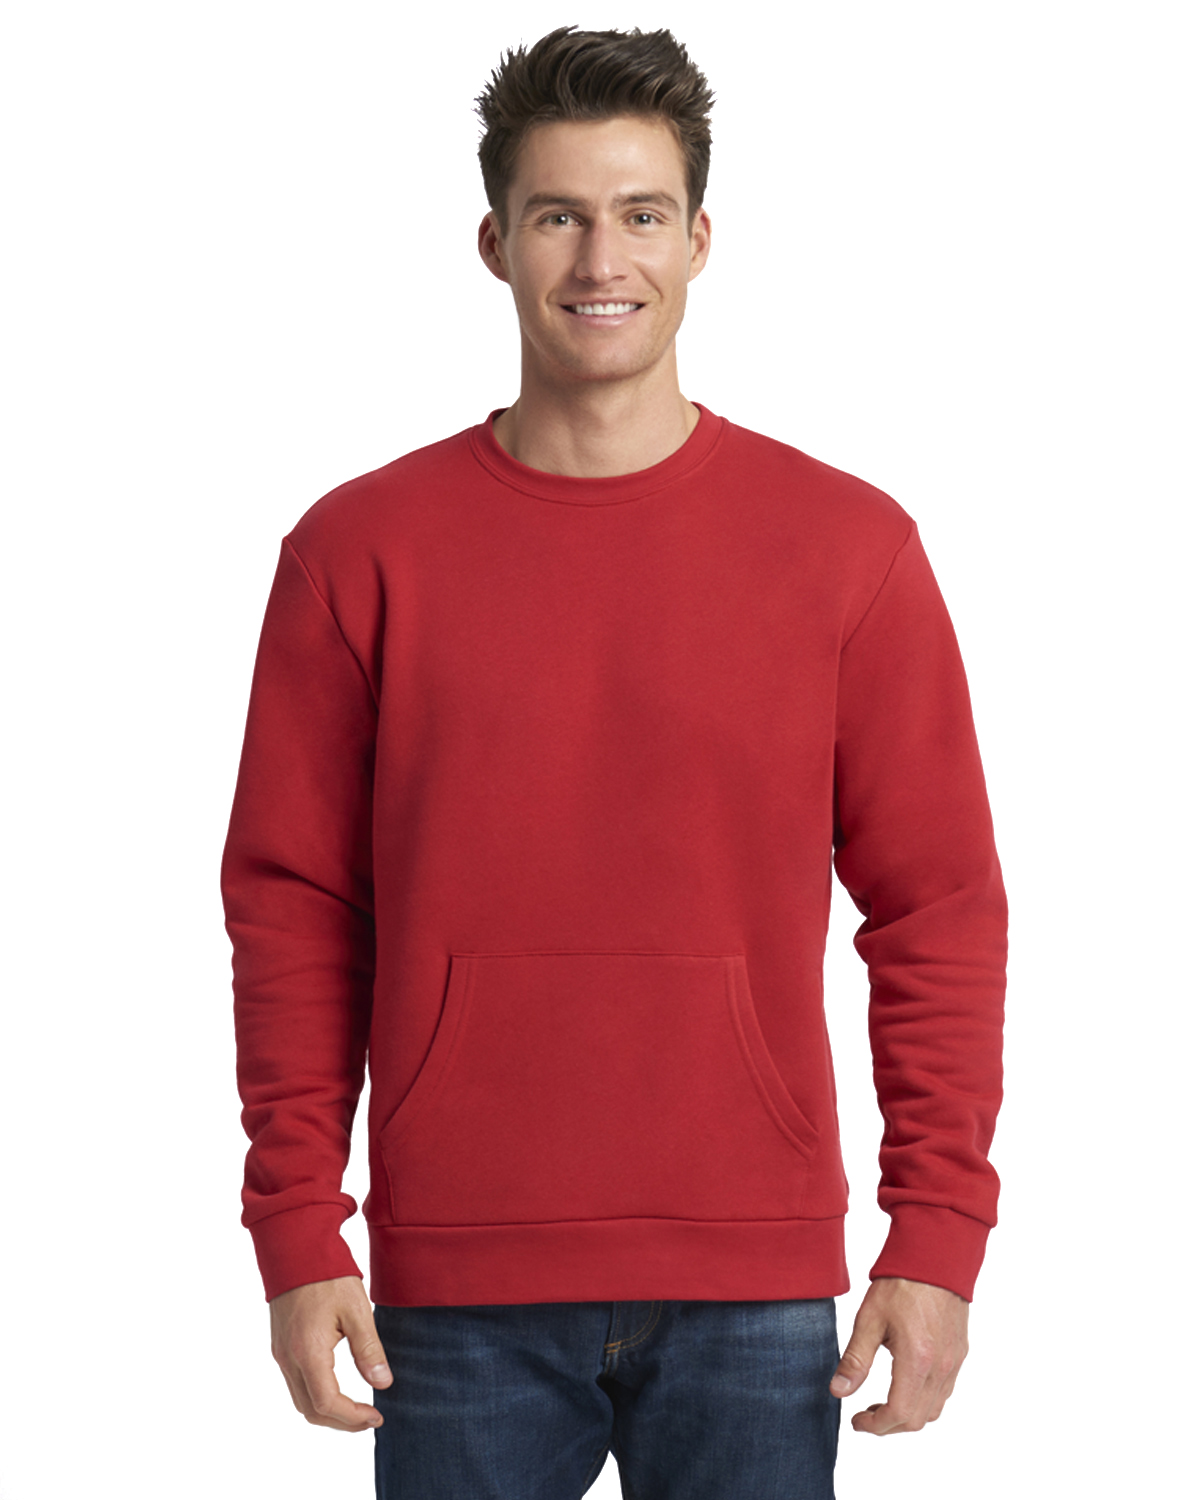 Next Level 9001 Unisex Long-Sleeve Crew with Pocket - Red - 2XL